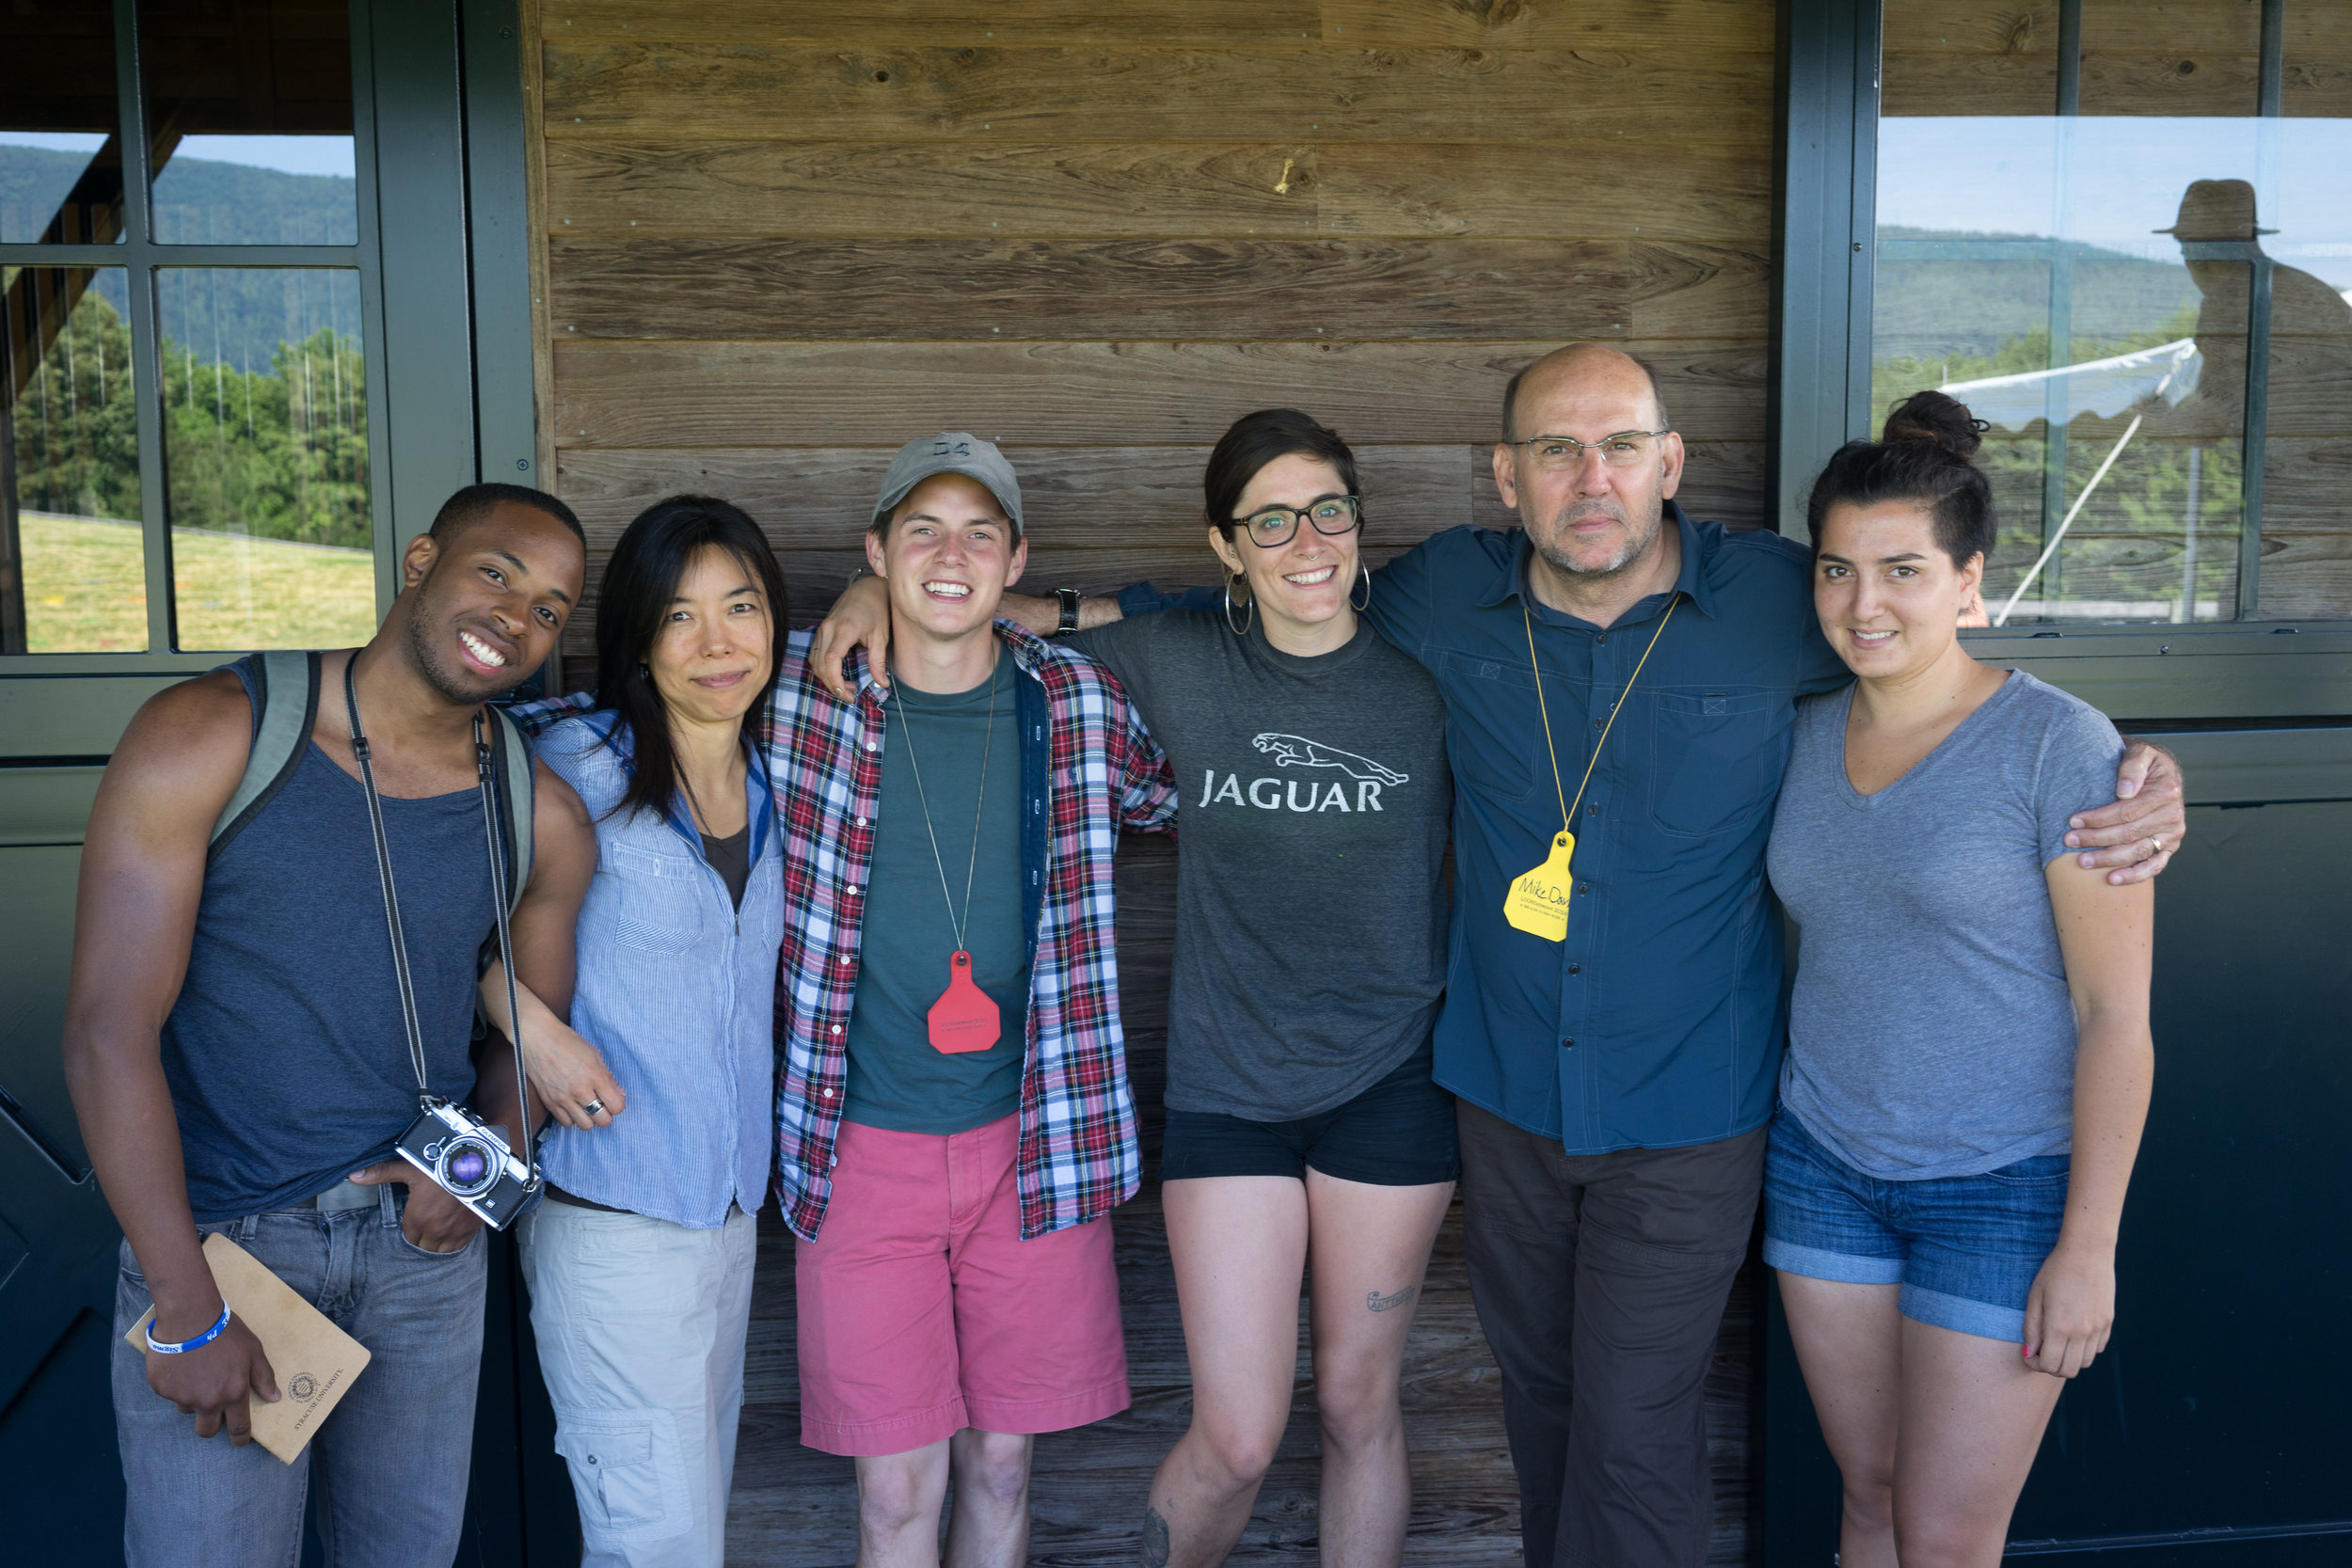 Mike and I with Newhouse MPD Photography students Ousman Diallo, Andrew Renneisen, Annie Flanagan and Manuela Marin Salcedo at LOOKBetween 2014